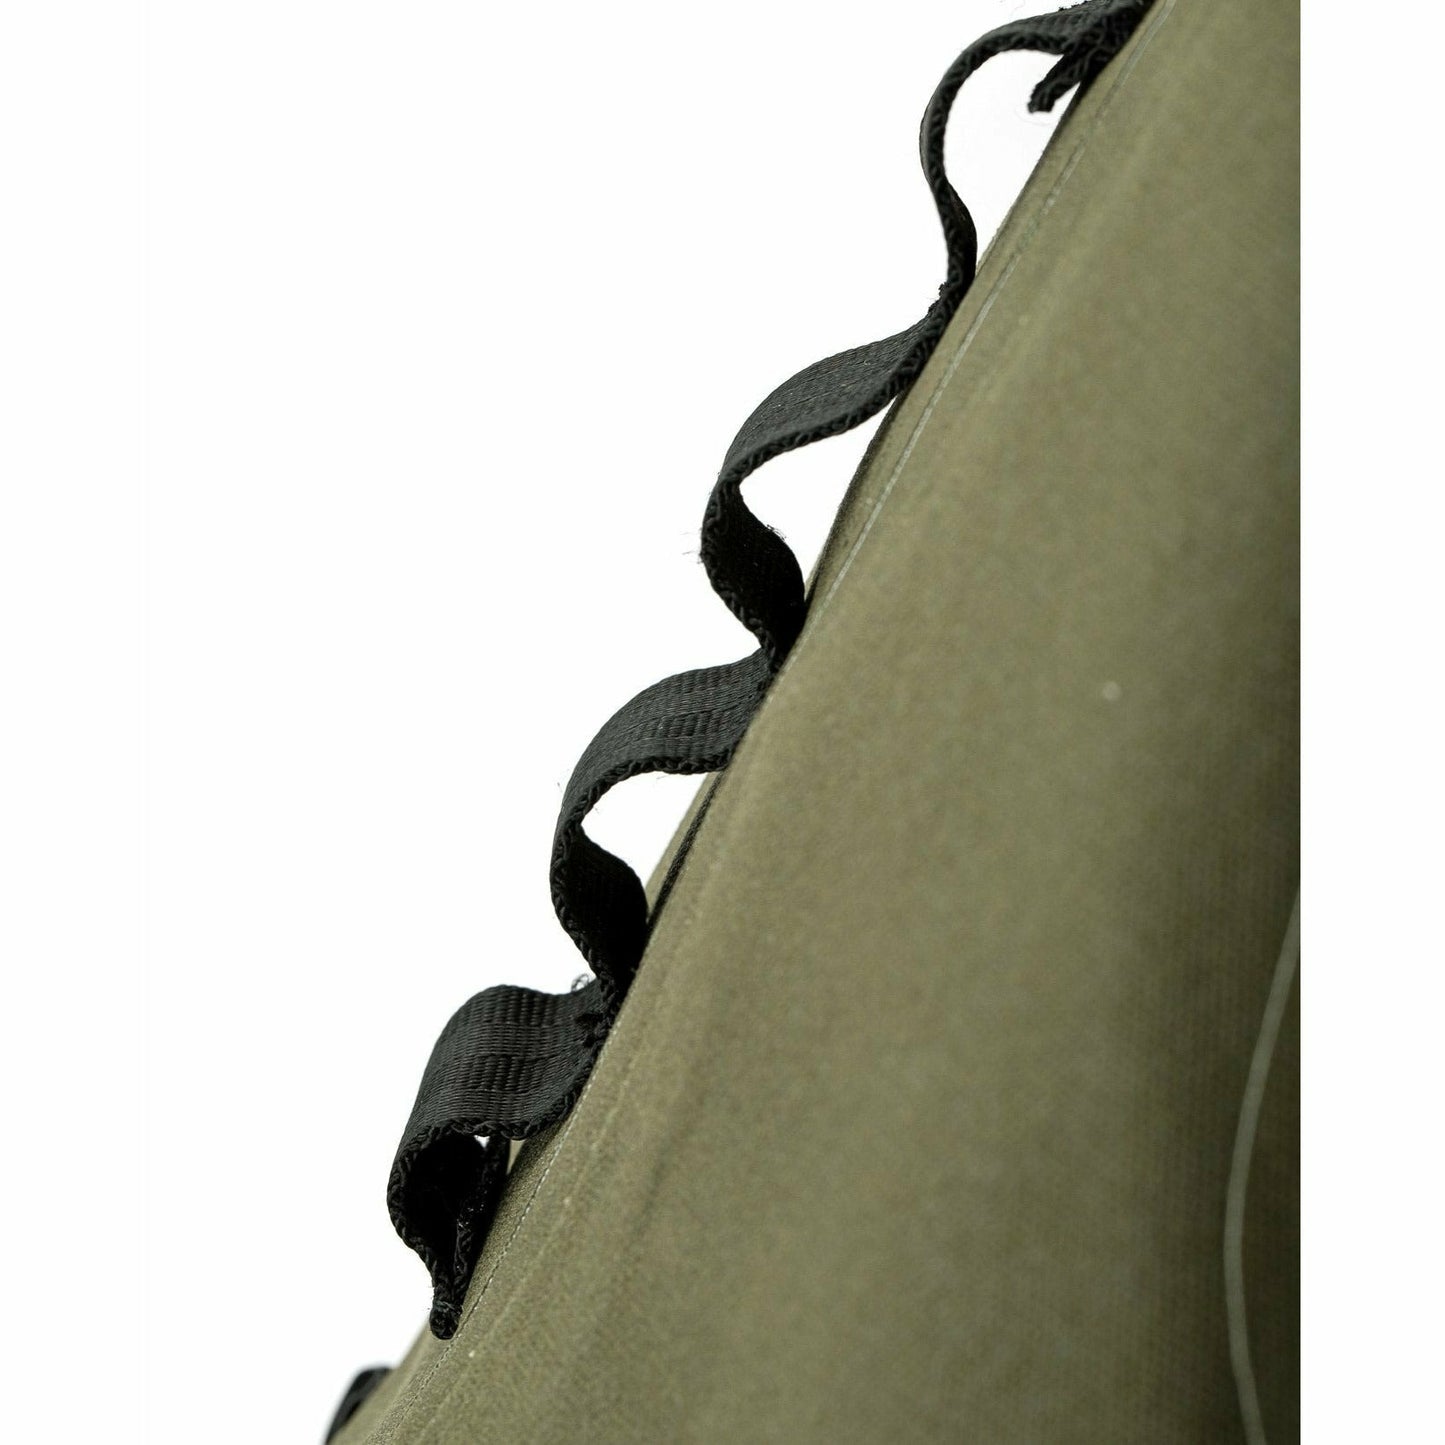 Creatures of Leisure - Transfer Dry Bag 25L : Military